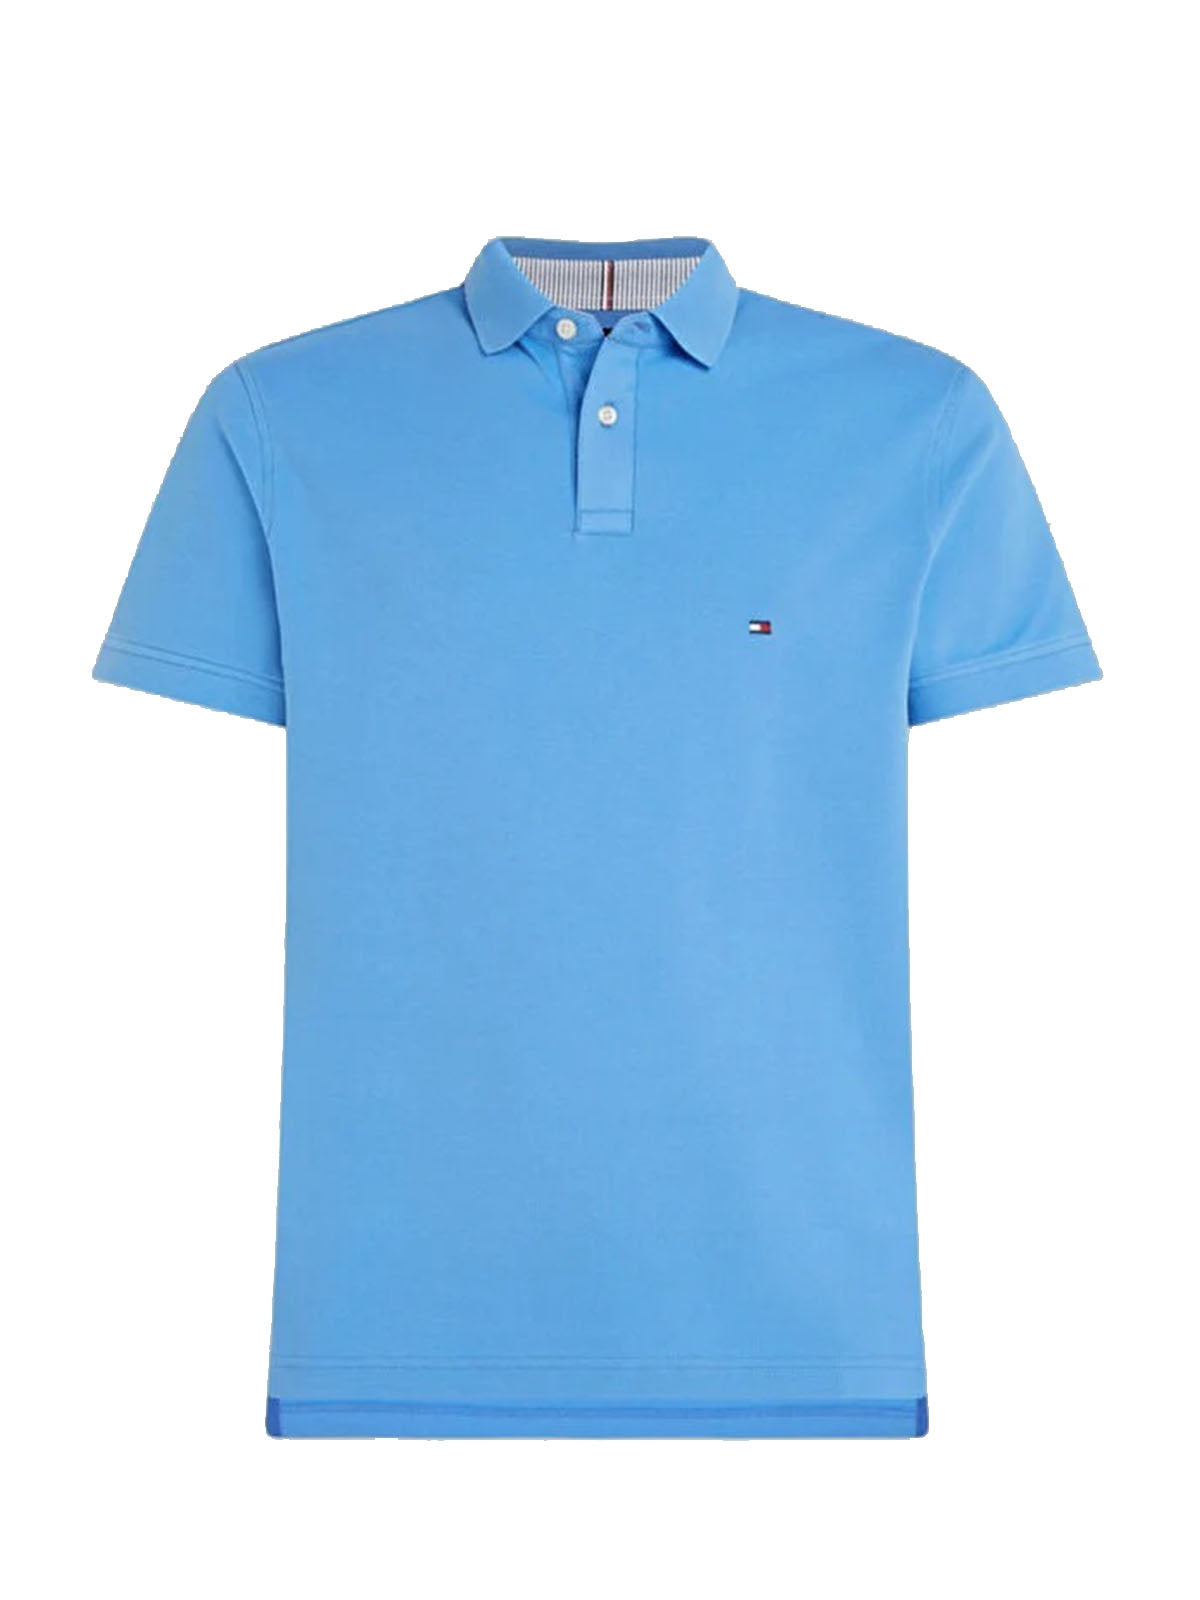 Polo Uomo Tommy Hilfiger - Polo 1985 Collection Regular Fit - Blu